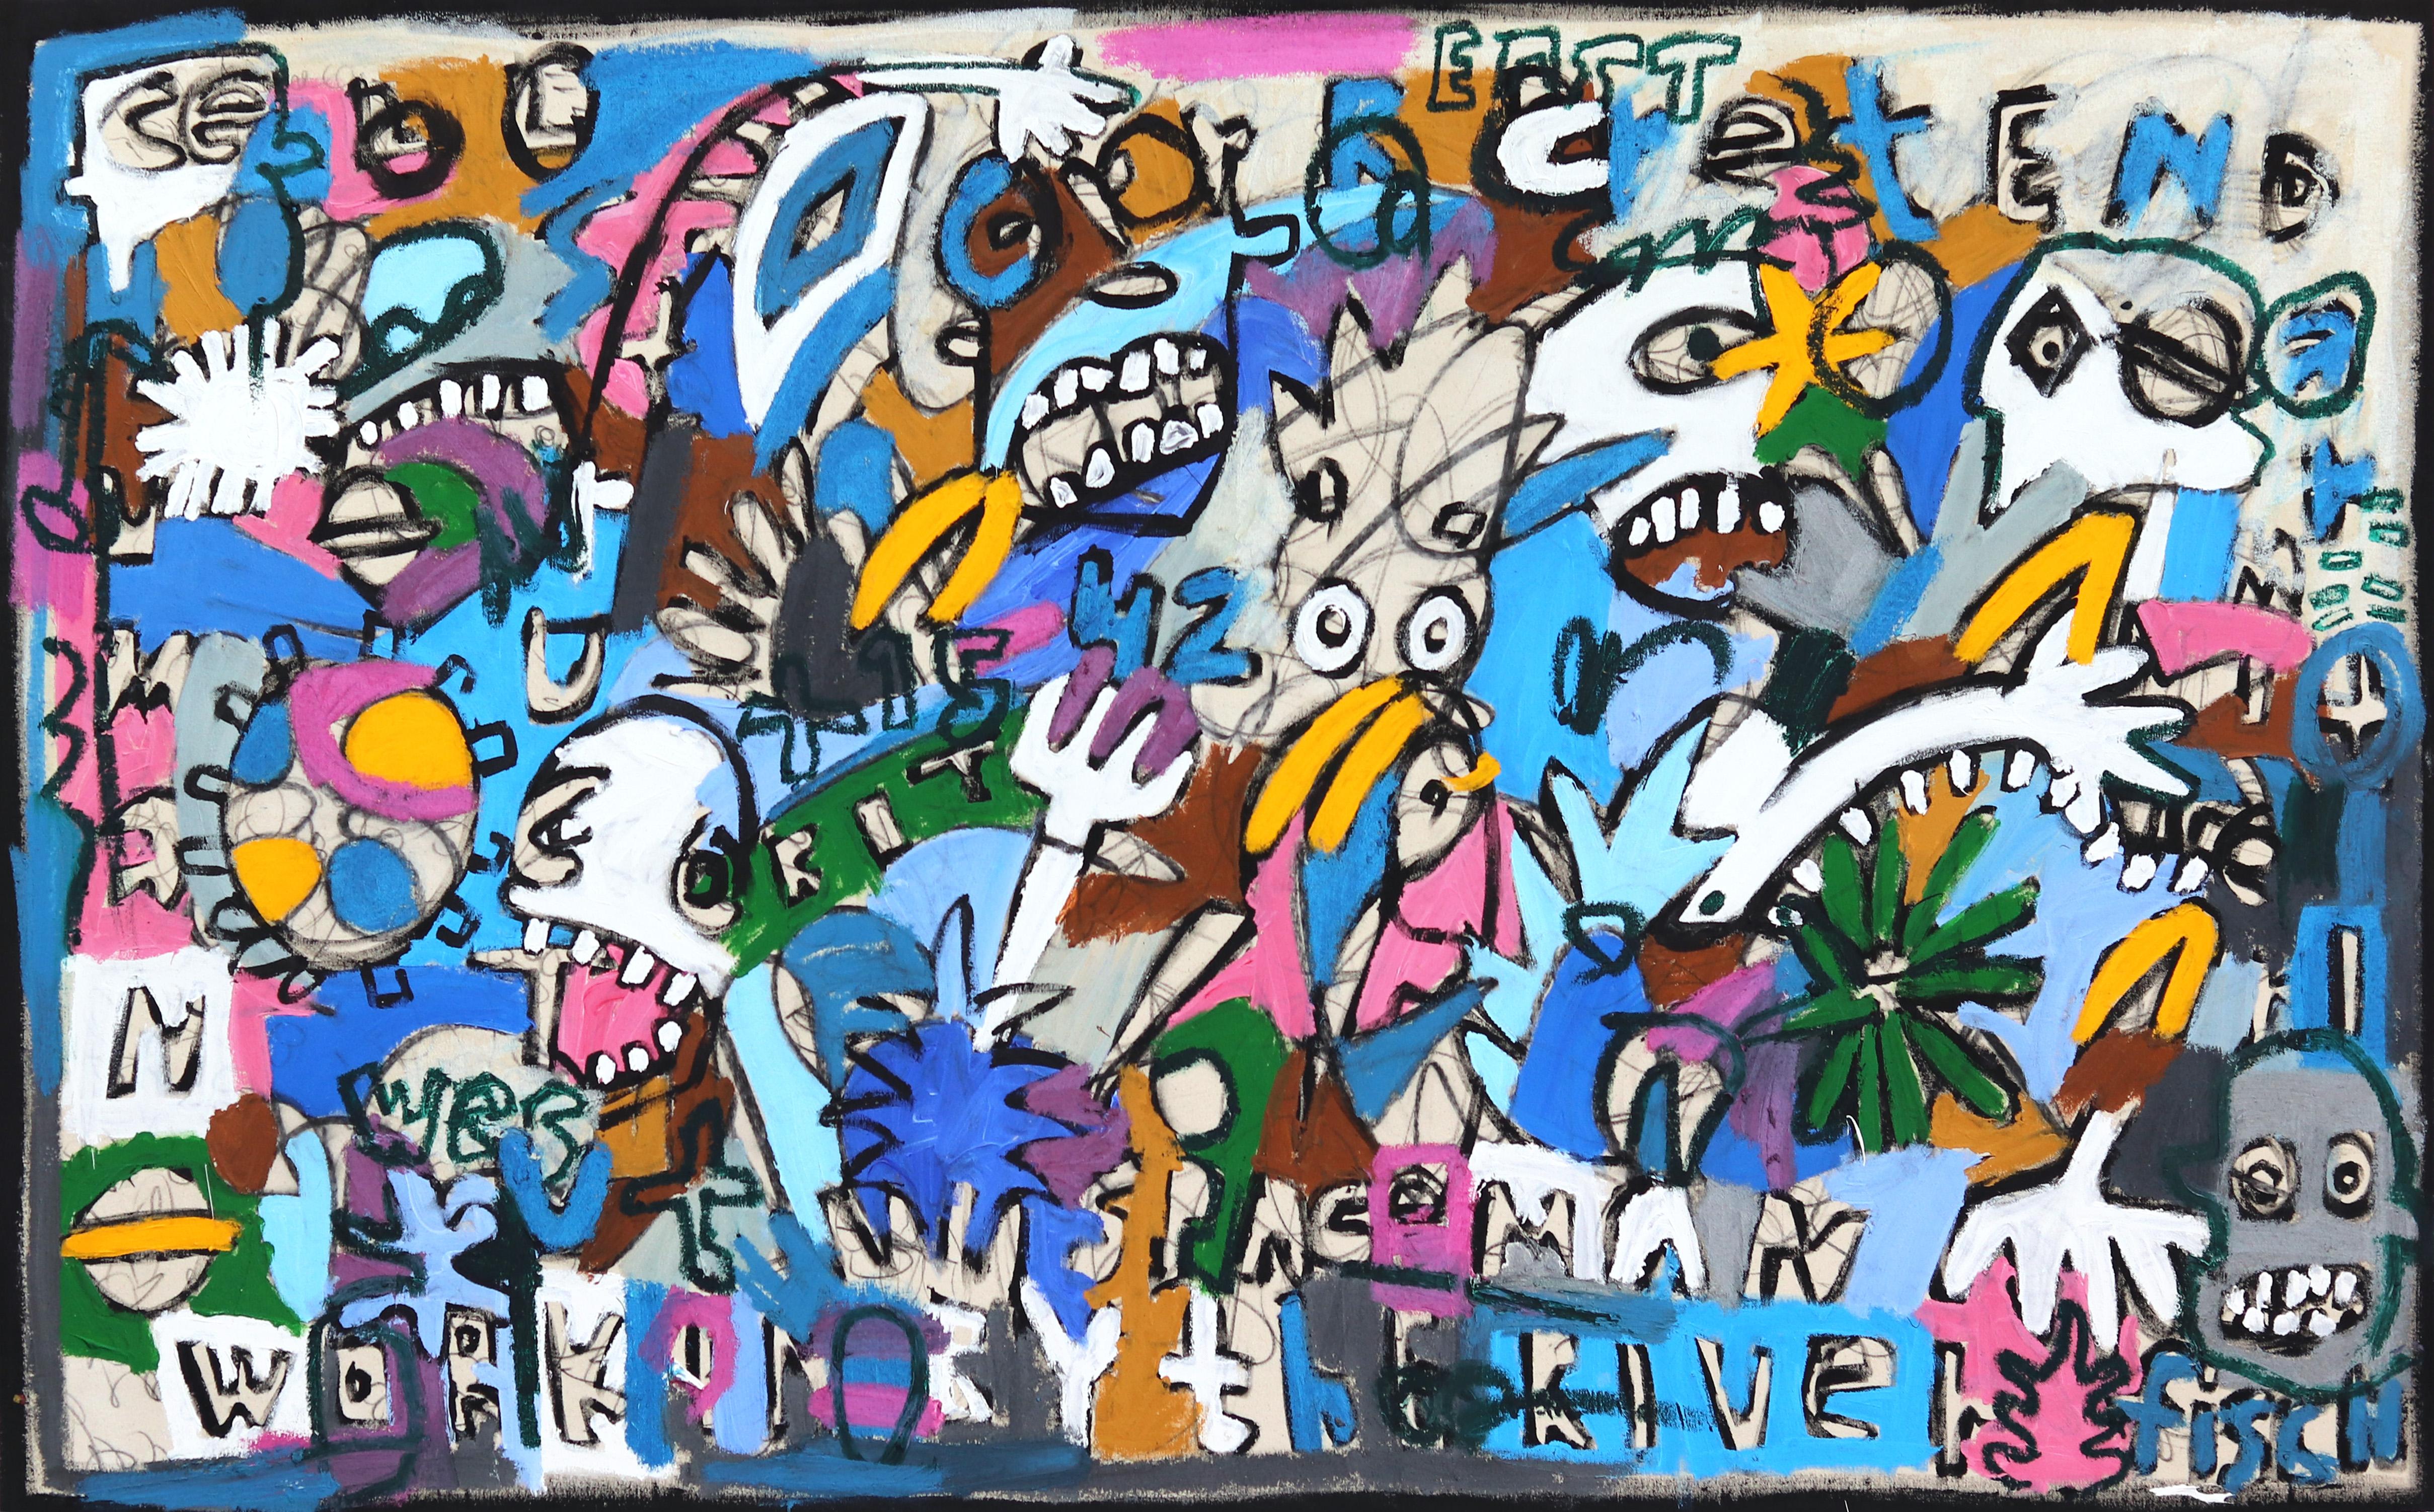 Spaceman Working By The River - Mixed Media Art by Jonas Fisch